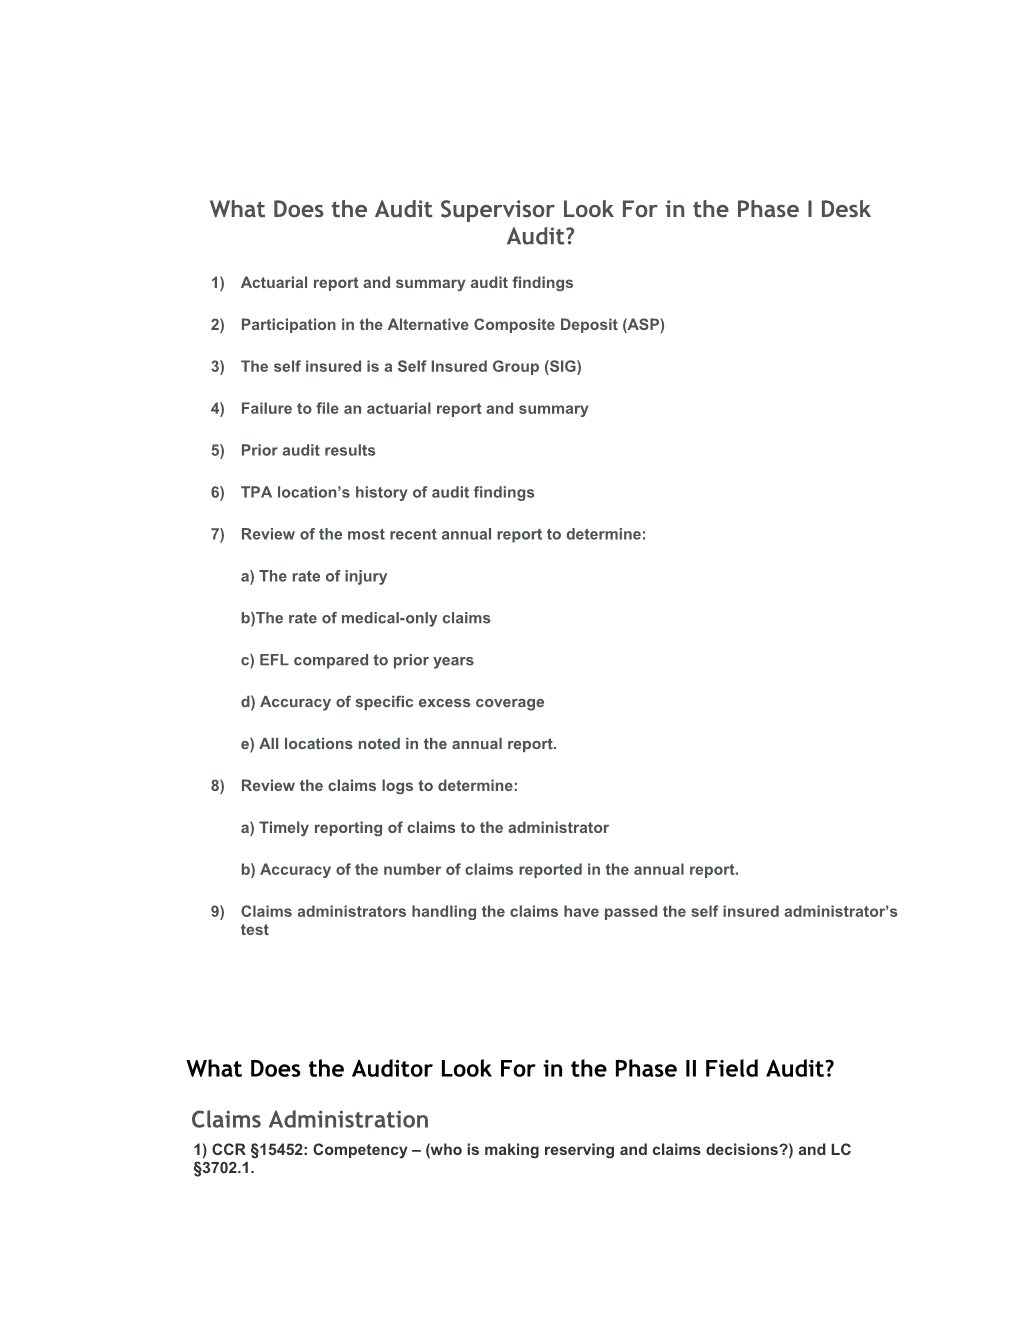 What Does the Audit Supervisor Look for in the Phase I Desk Audit?